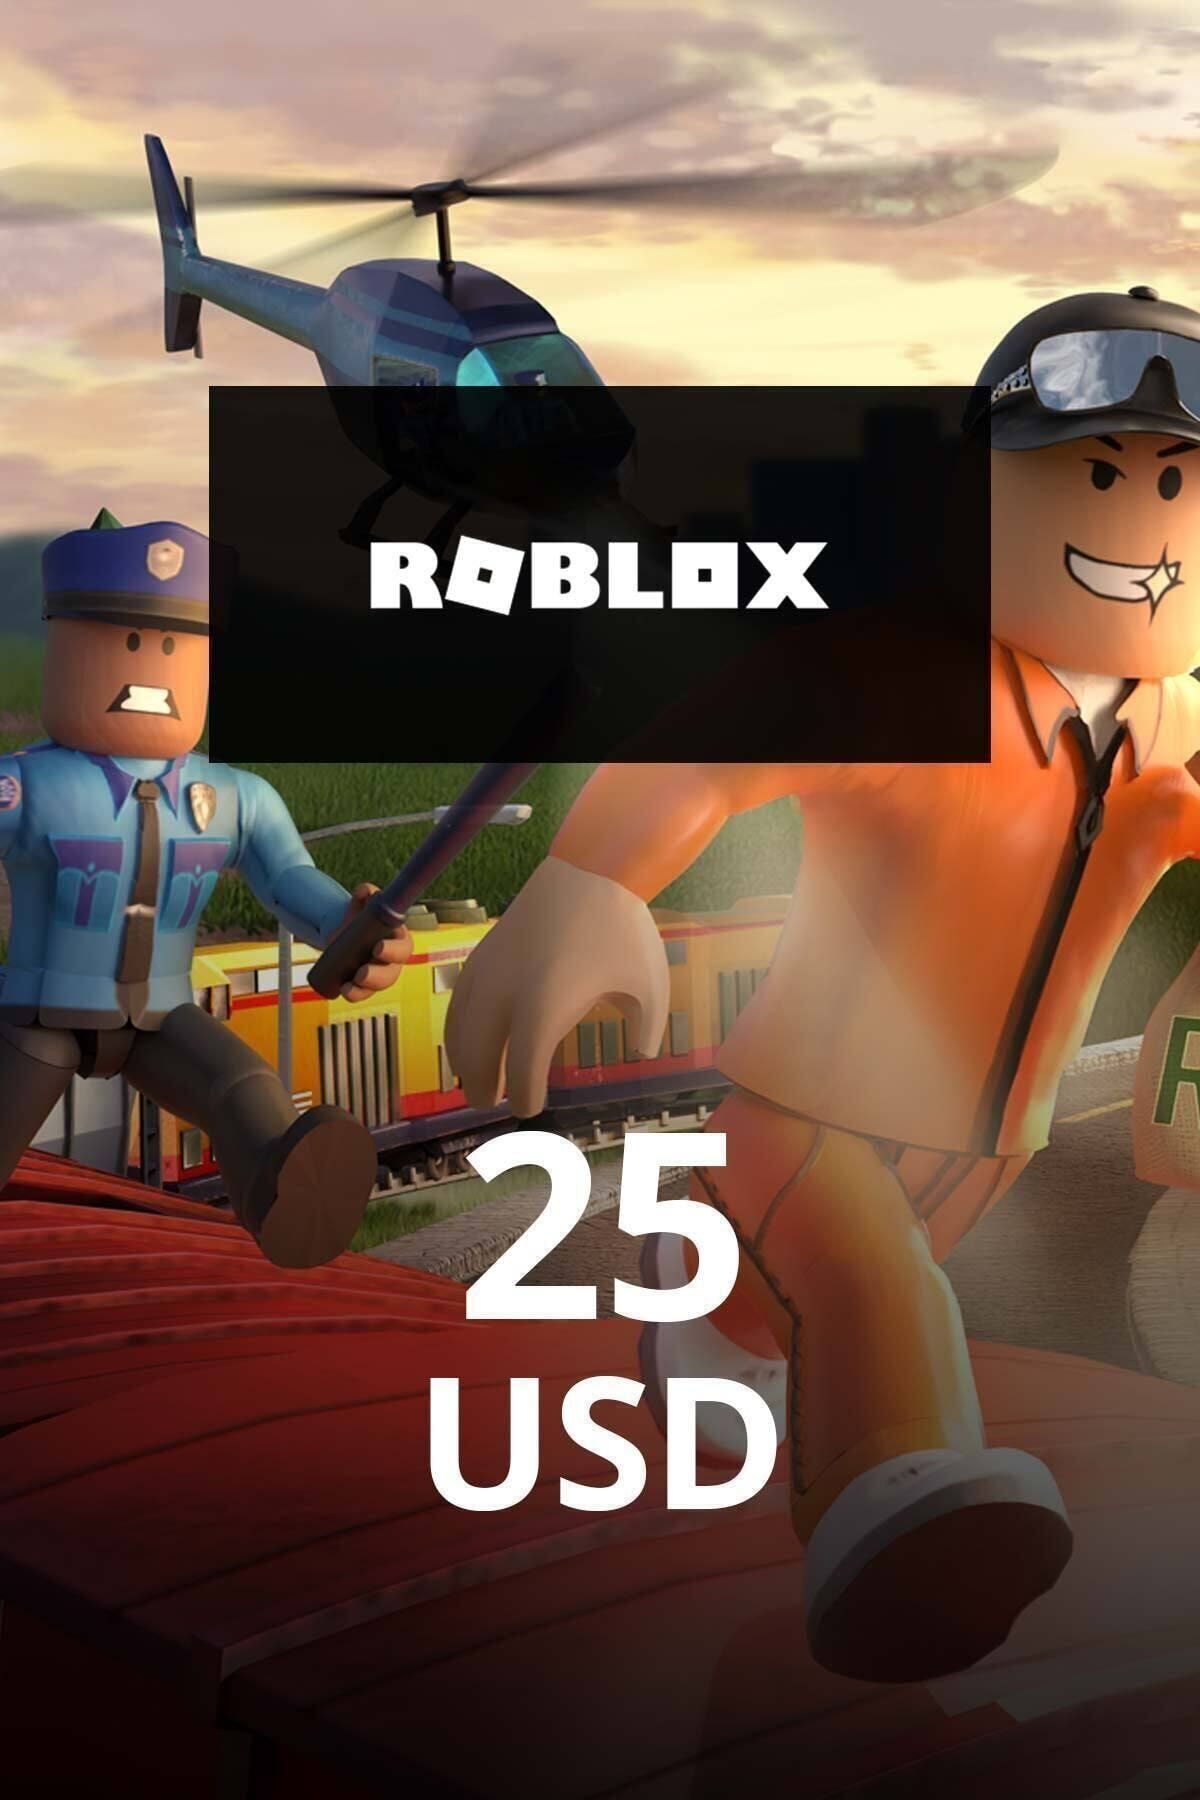 Buy Roblox Gift Card 25 USD